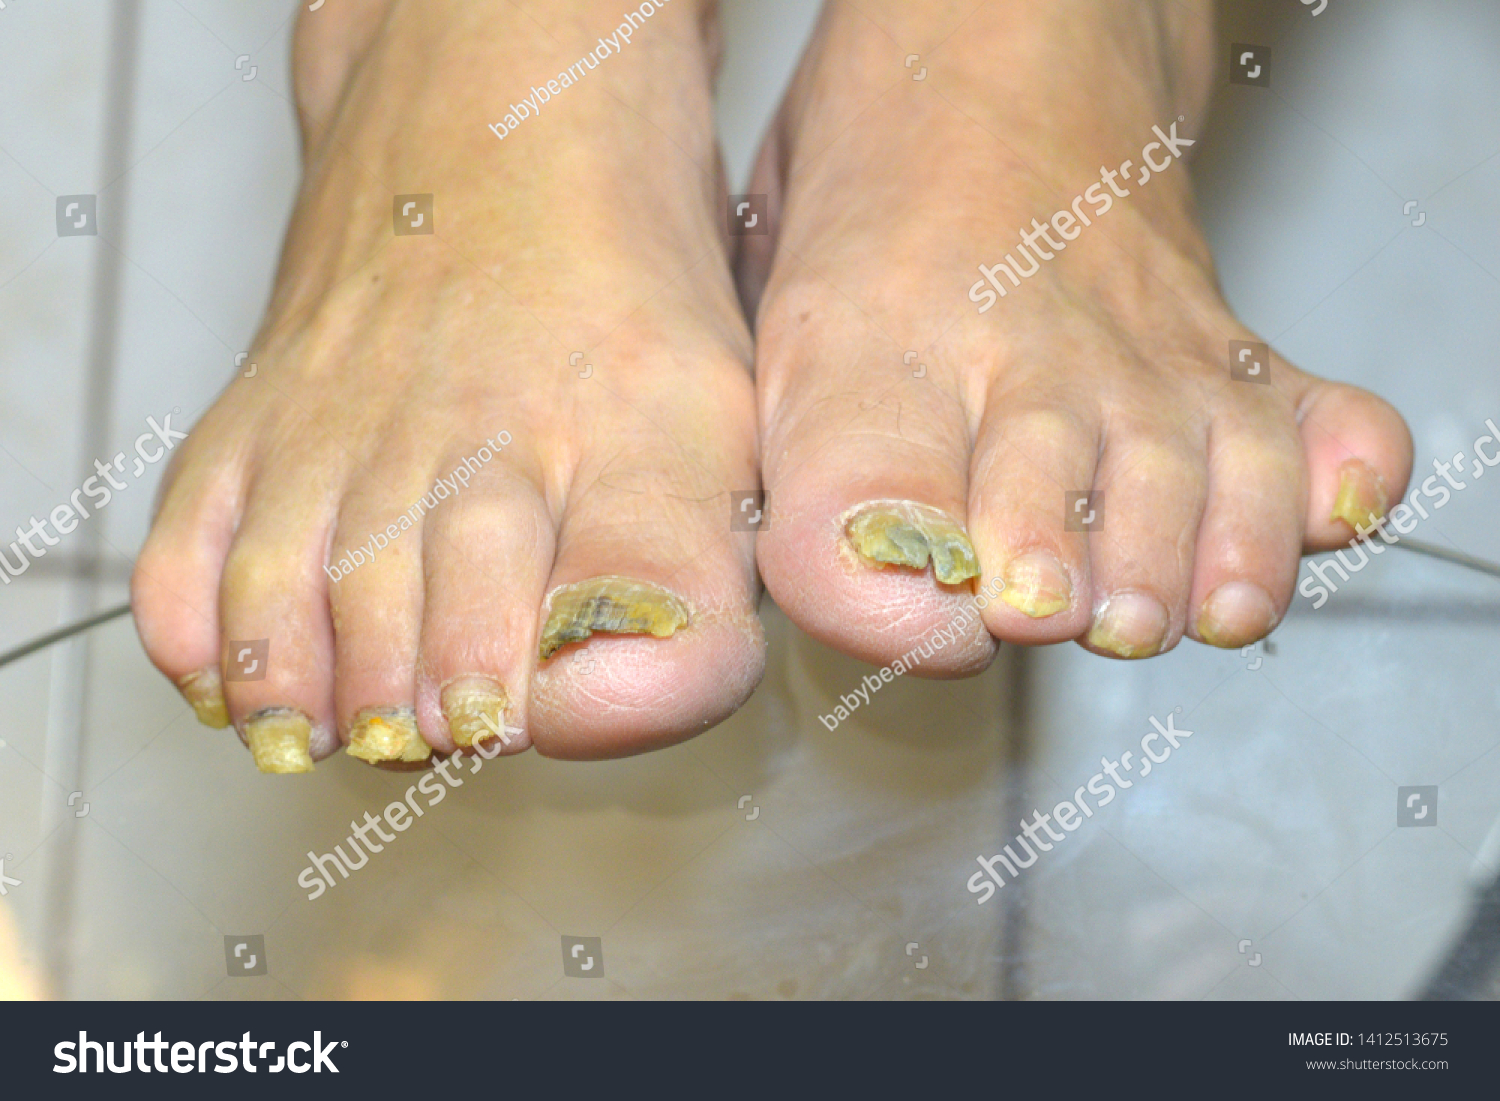 Image Old Dry Cracked Feet Fungus Stock 